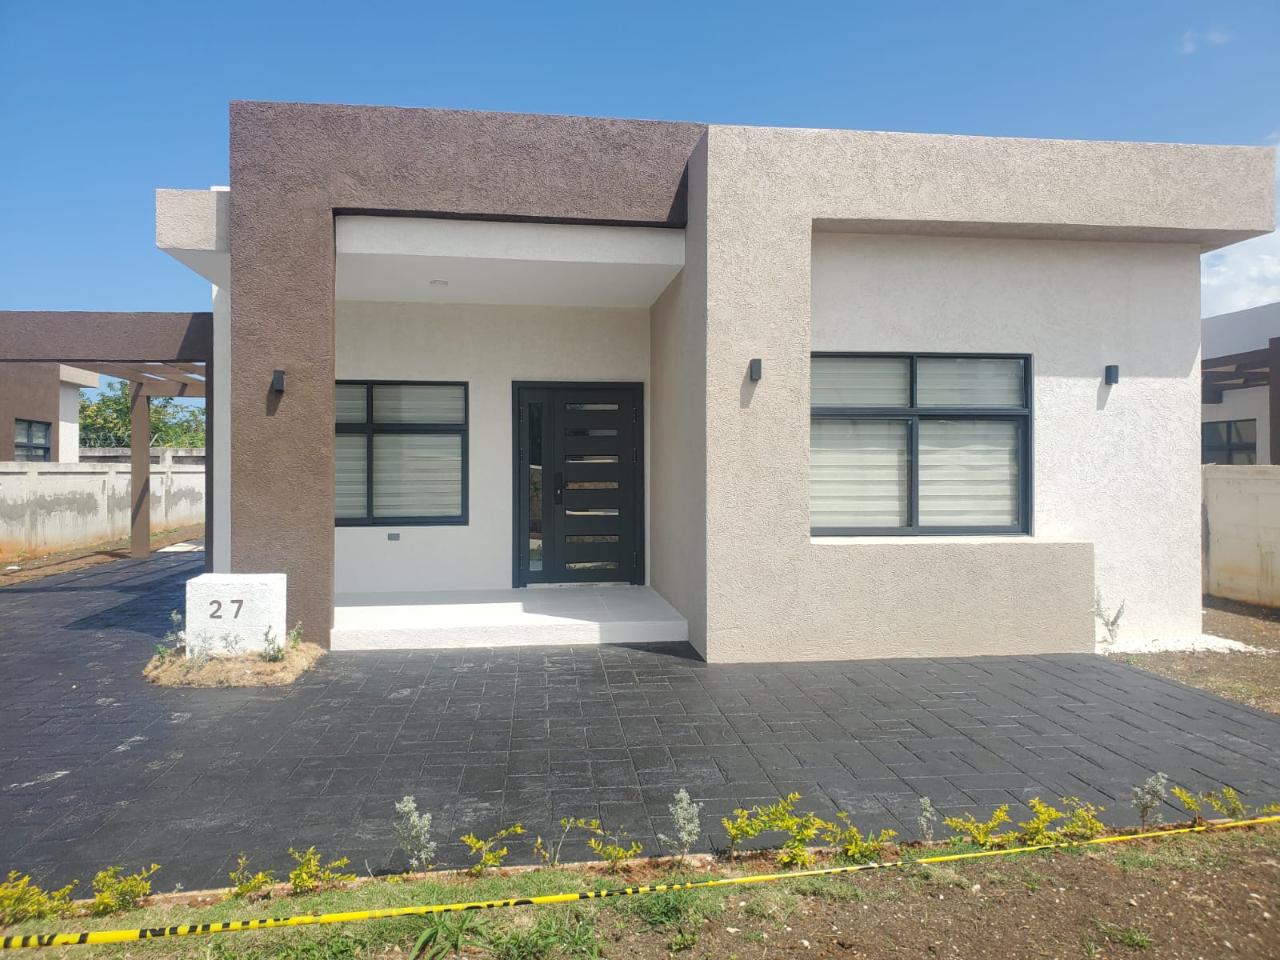 Unfurnished 3 Bedroom 3 1/2 Bathroom House For Rent in Pyramid Point ...